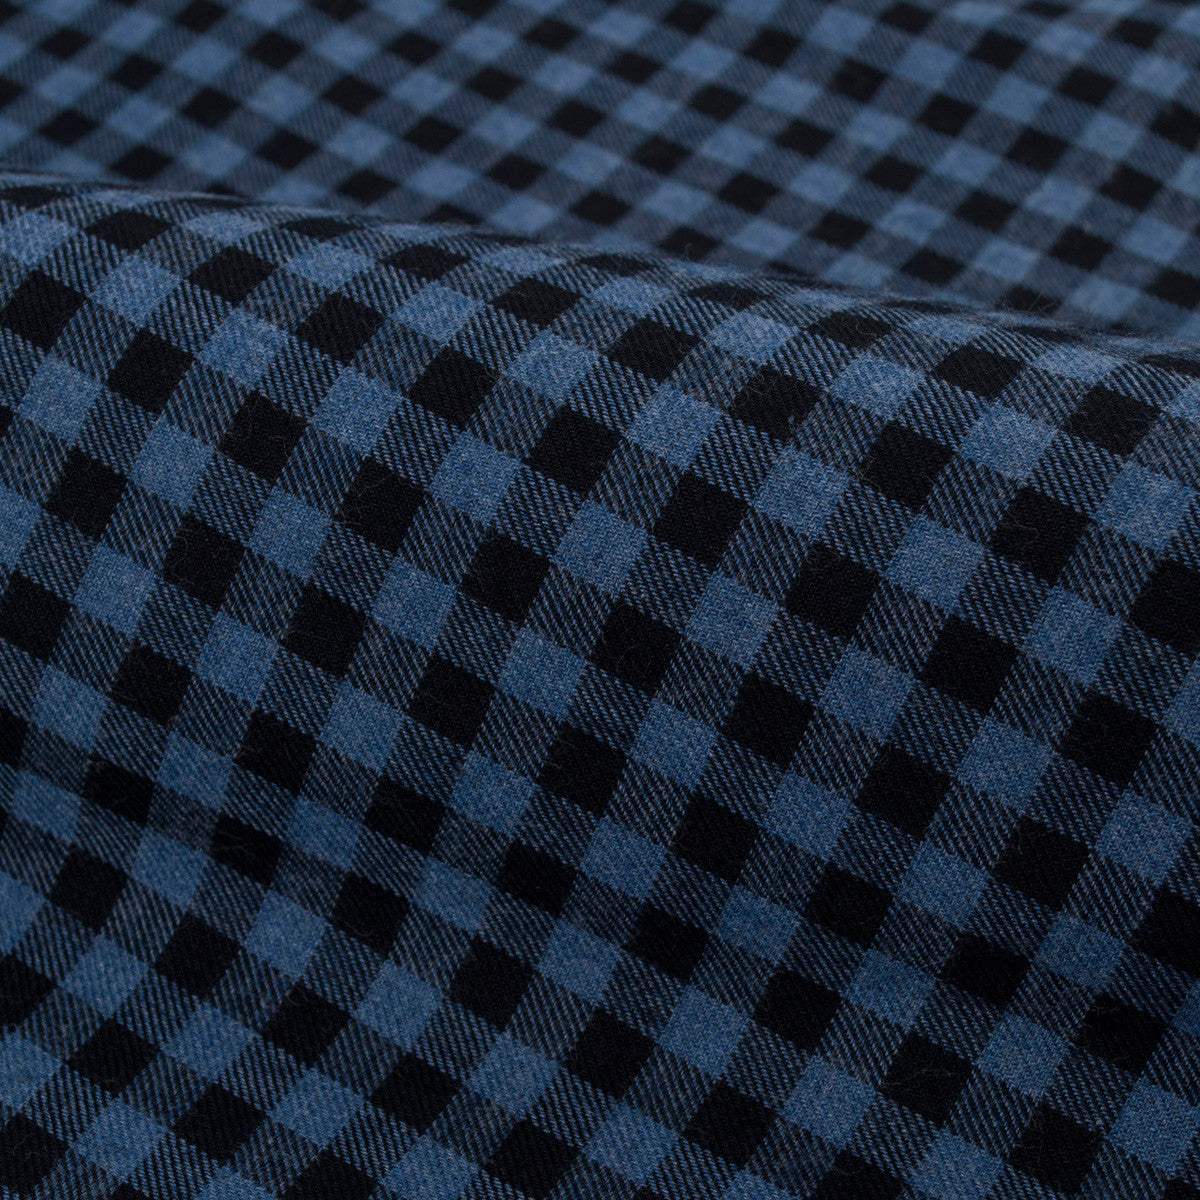 Blue and Black Gingham Flannel